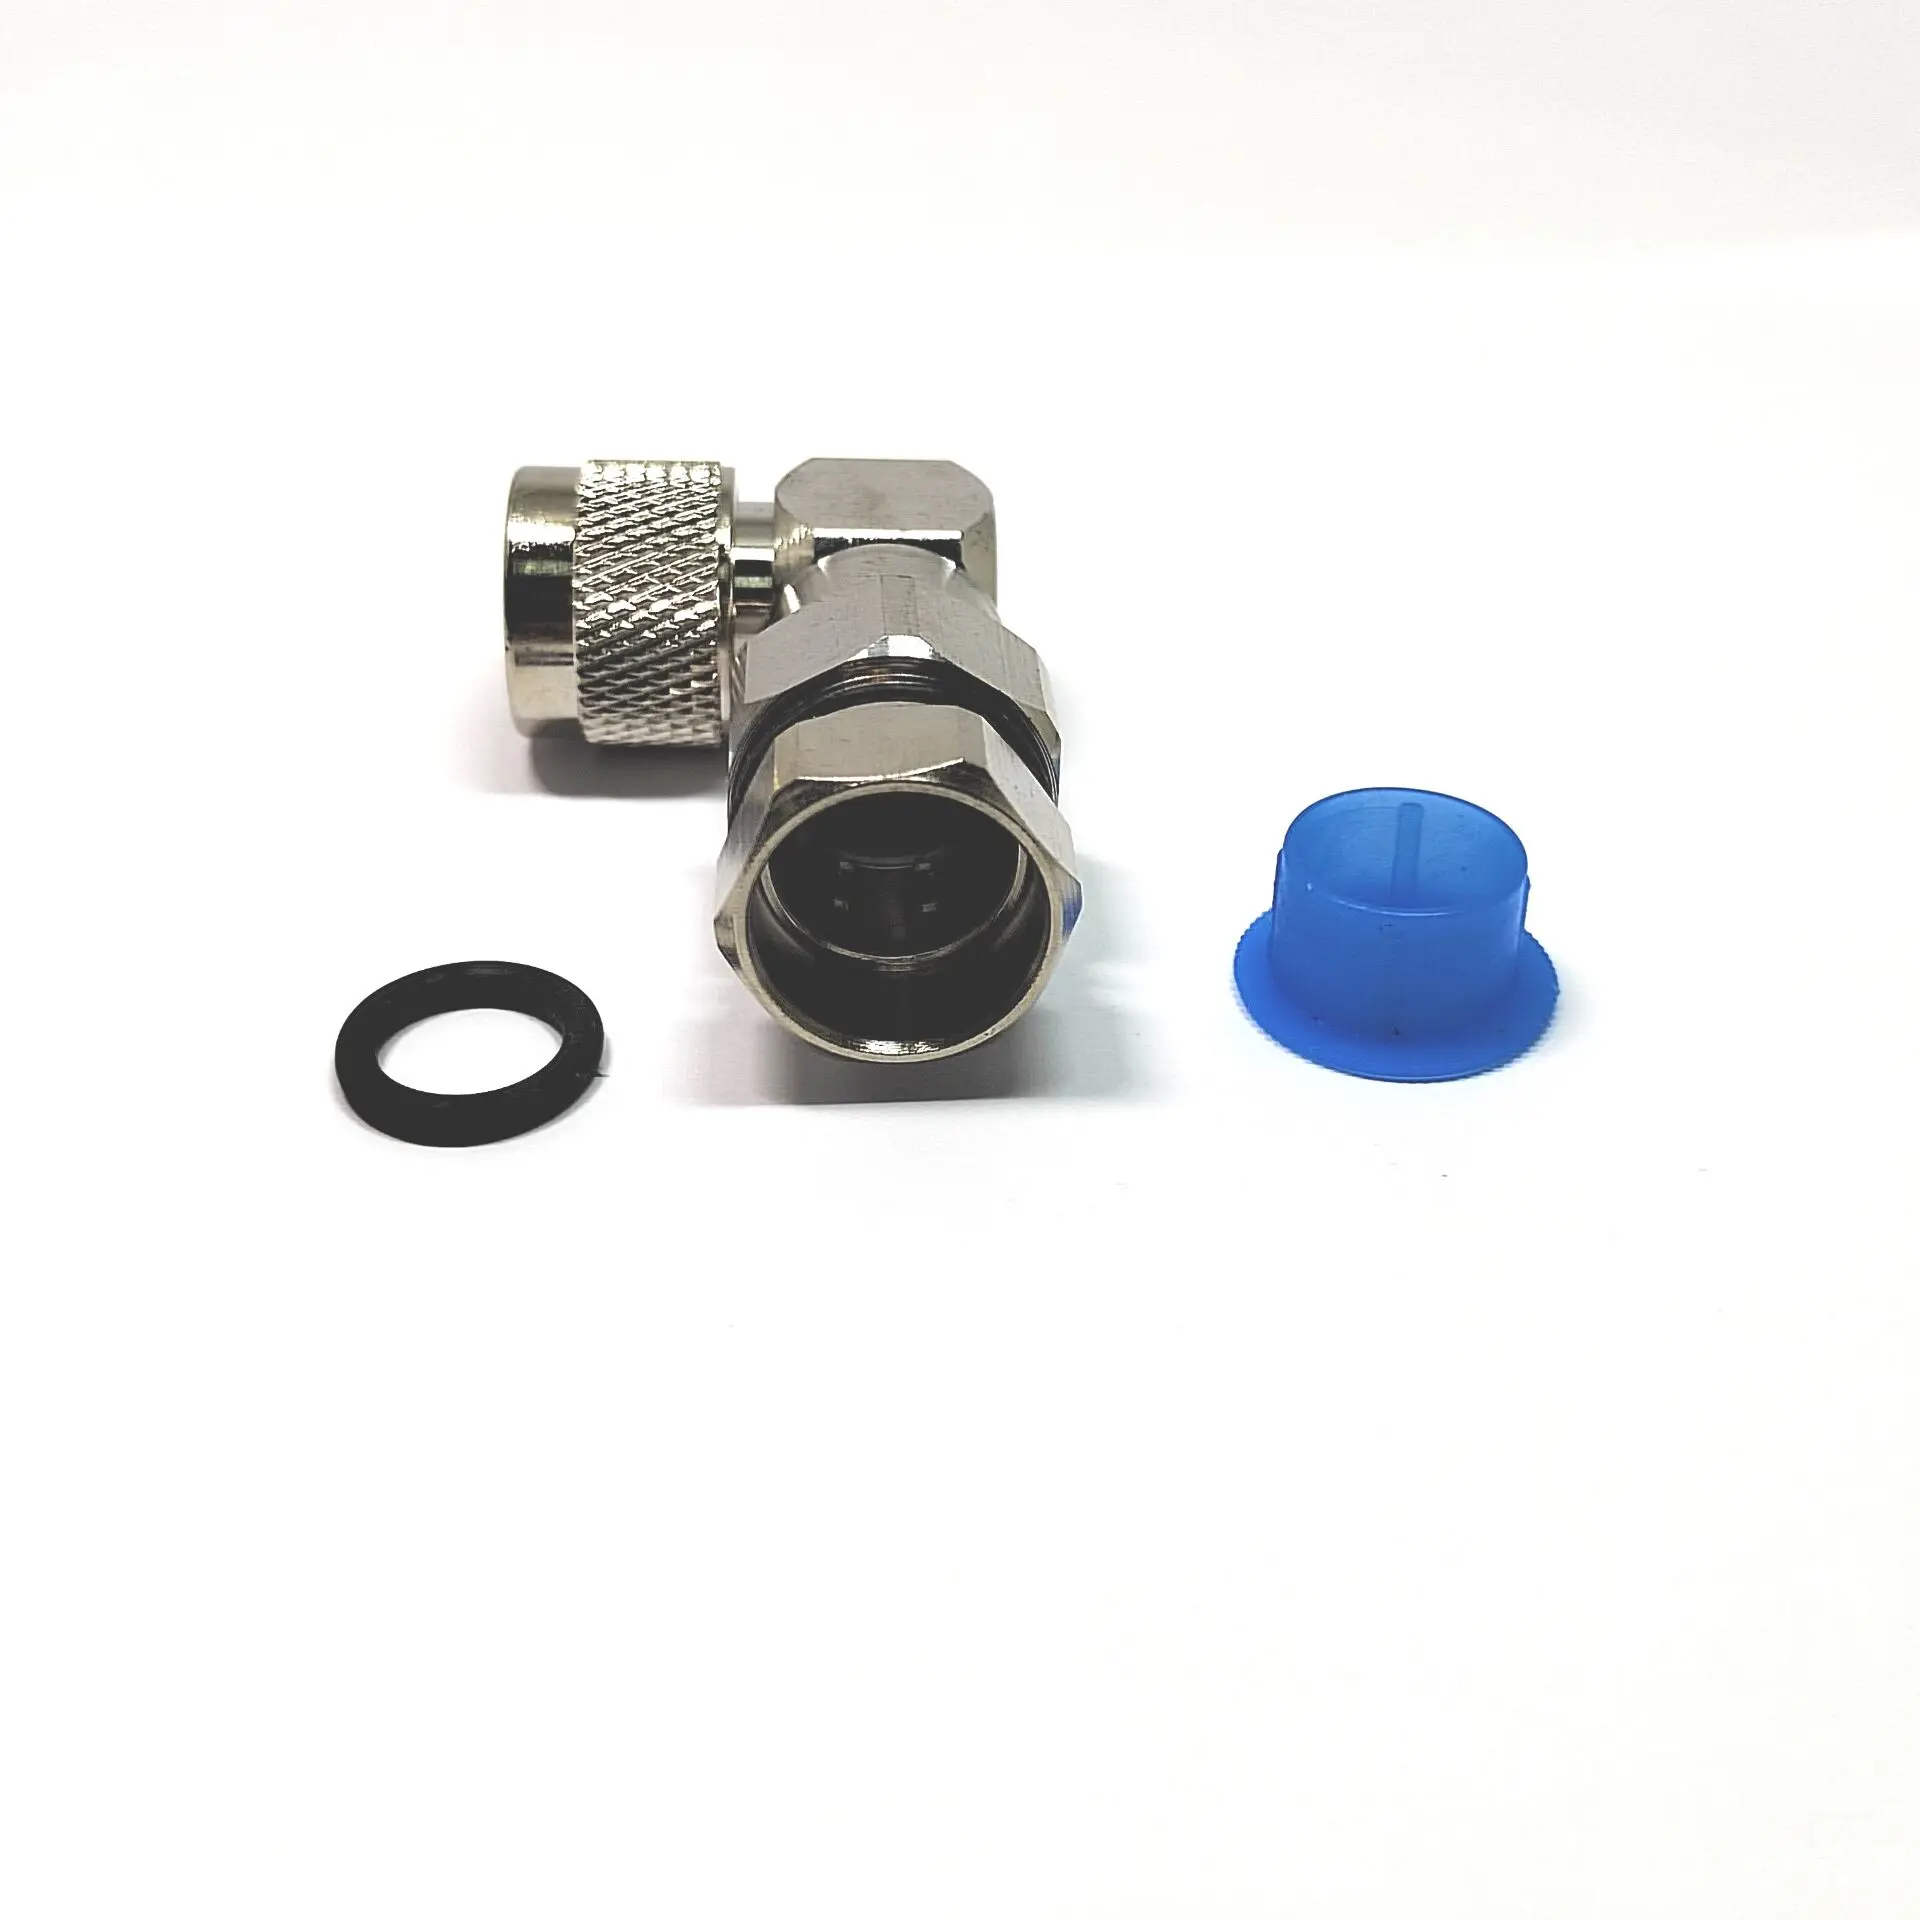 RA  N Type Male Plug Connector right angle for 1/2 feeder Flex Cable LDF4-50A rf coaxial connectors manufacture